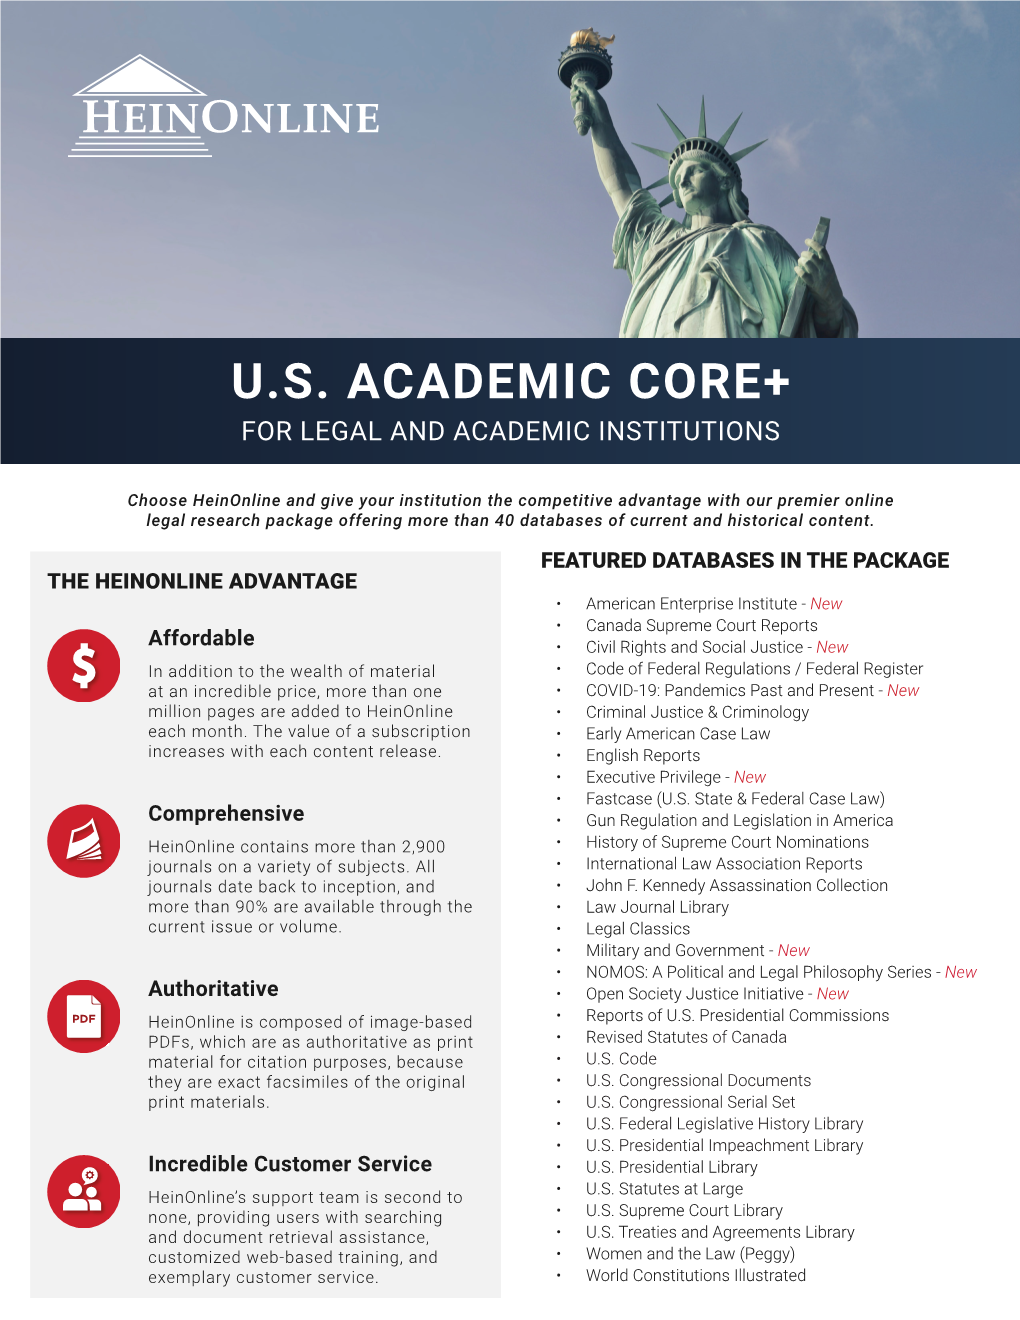 U.S. Academic Core+ for Legal and Academic Institutions